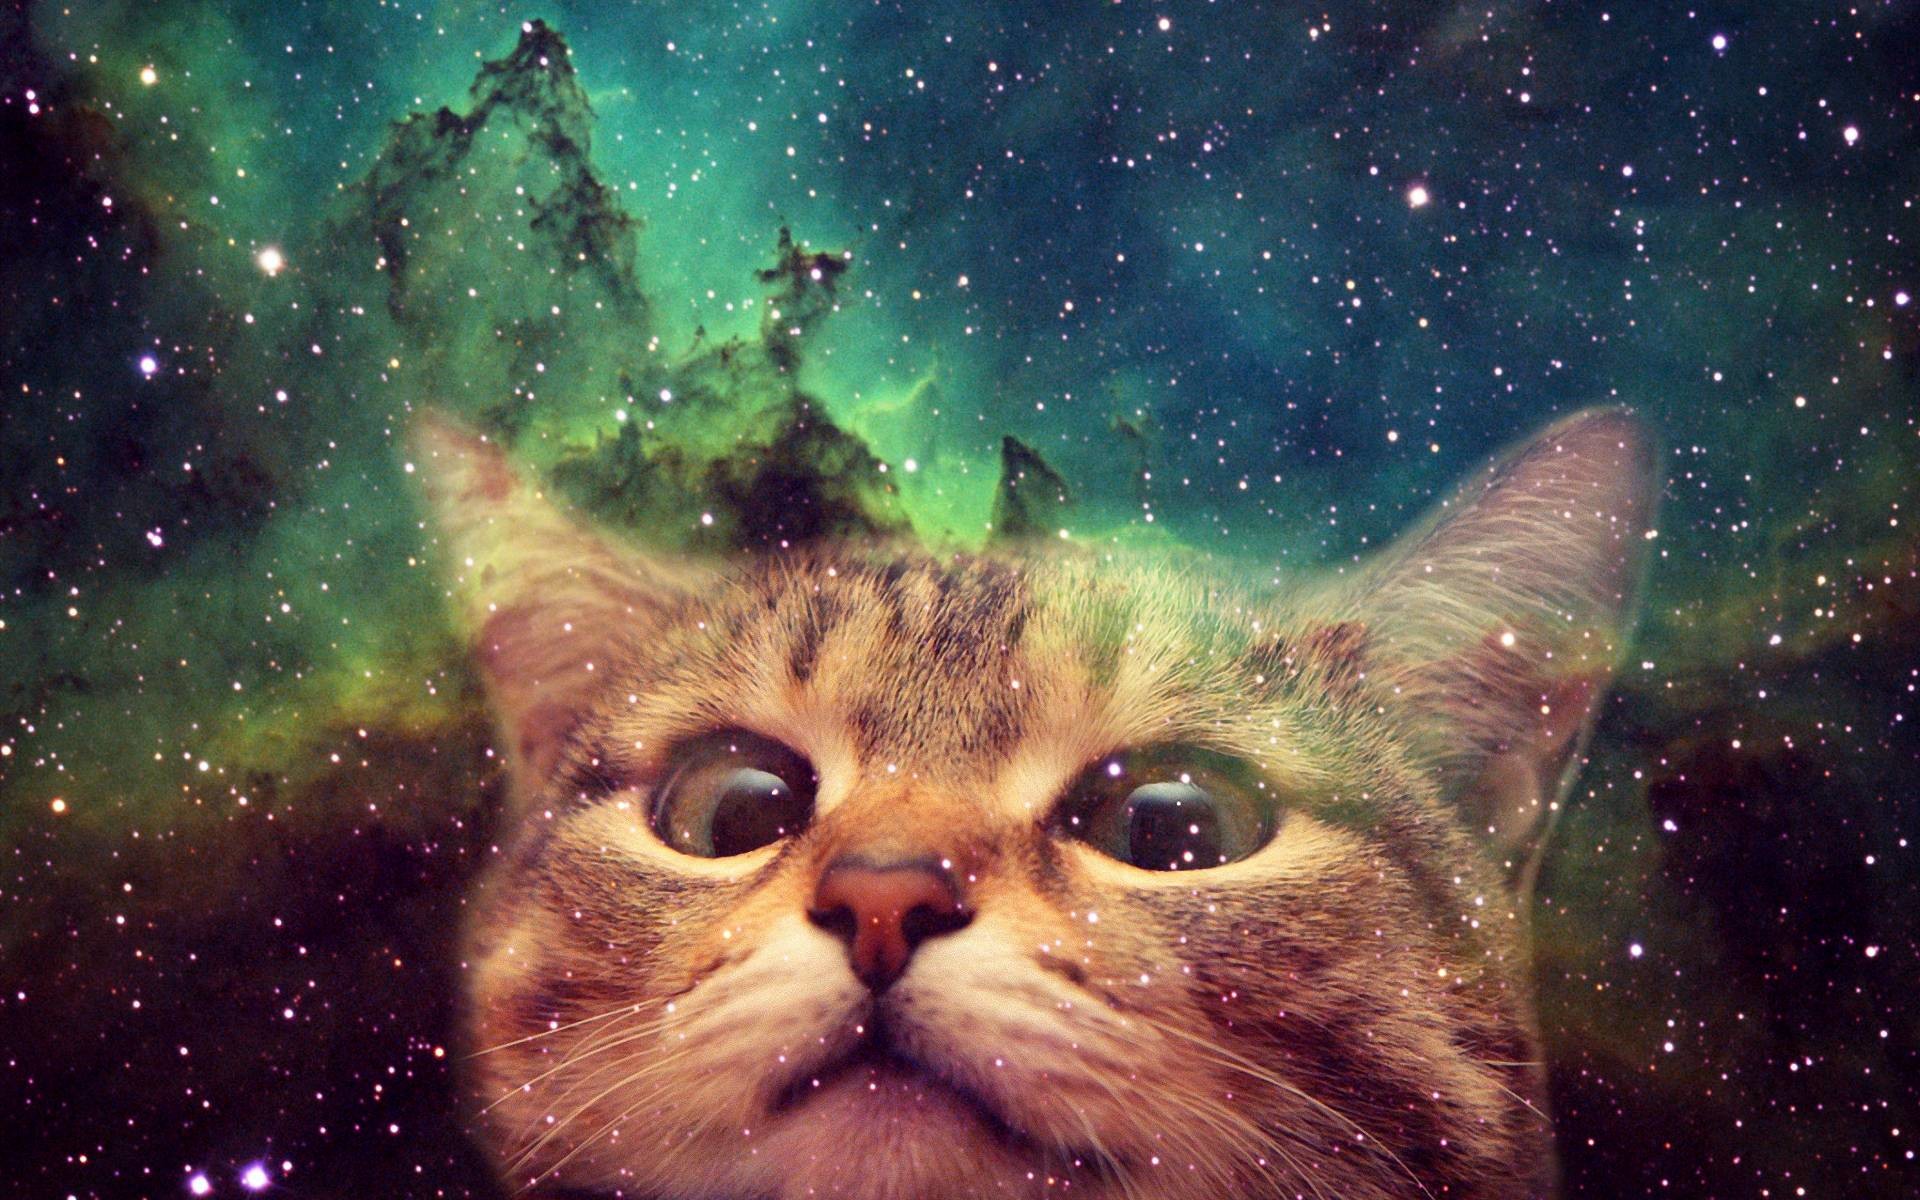 1920x1200 Awesome Cats In Space Wallpapers - Caveman Circus | Caveman Circus .